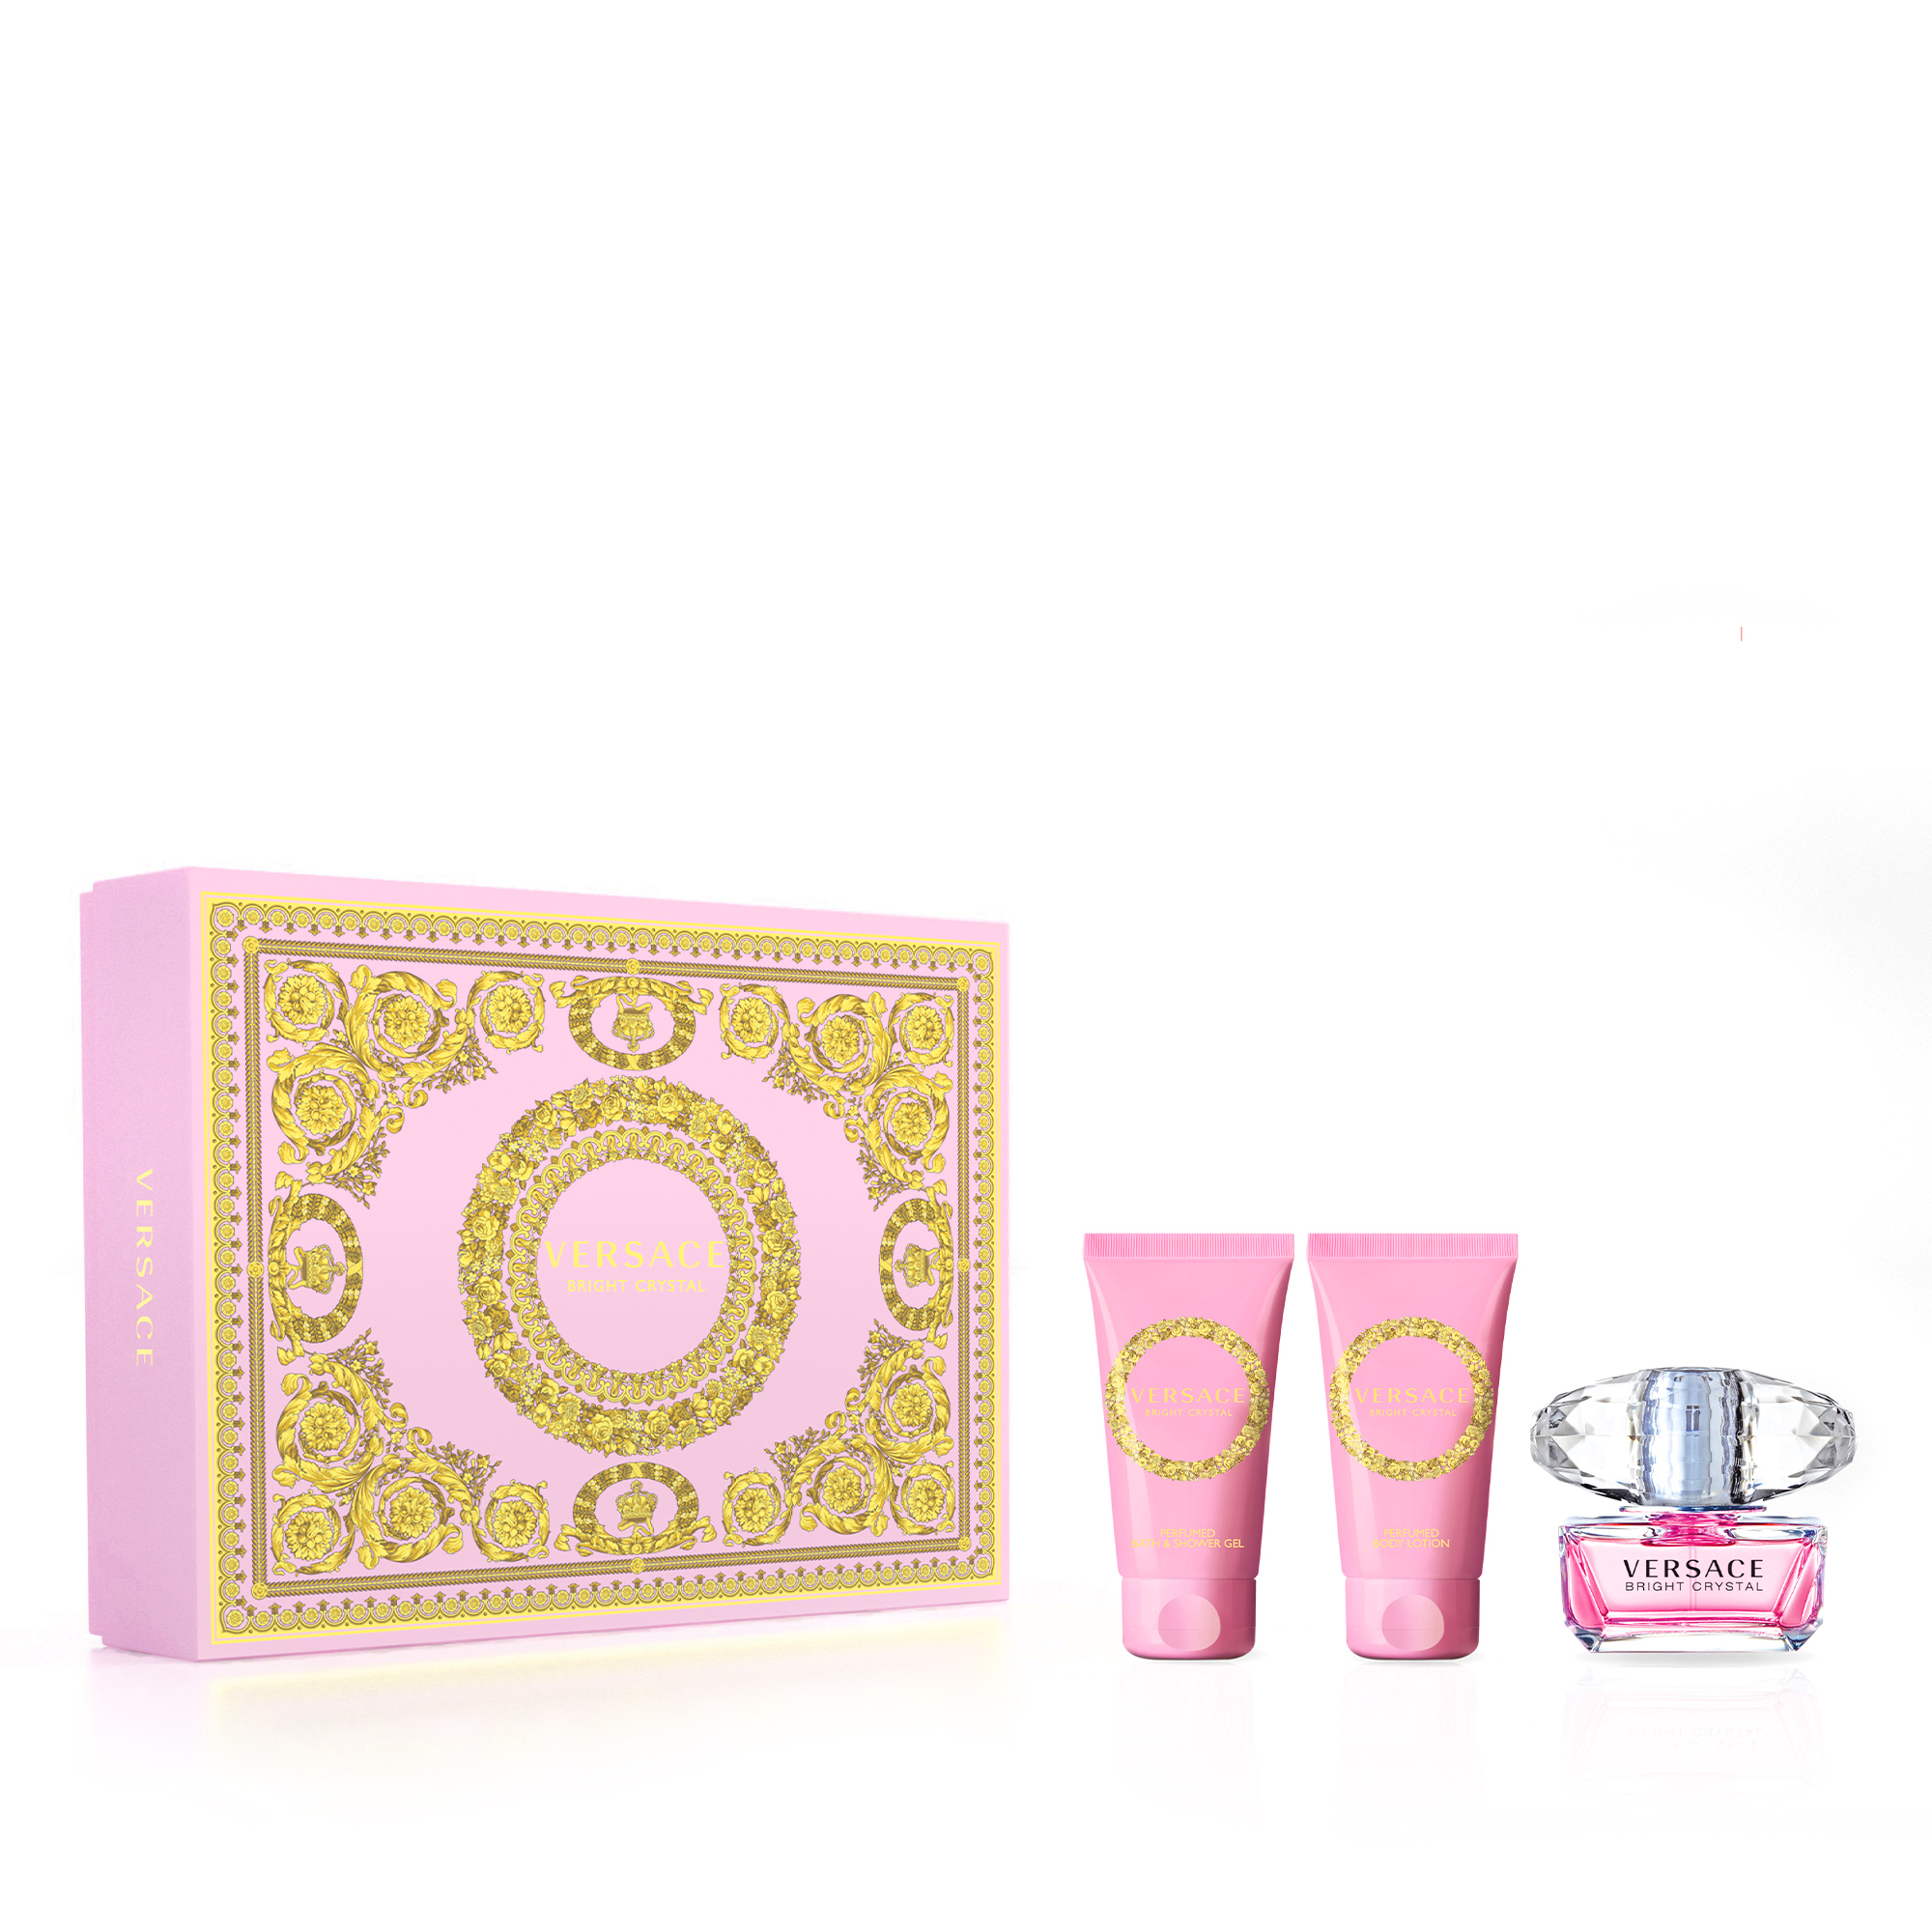 Versace Bright Crystal EDT 50ml Gift Set 2020